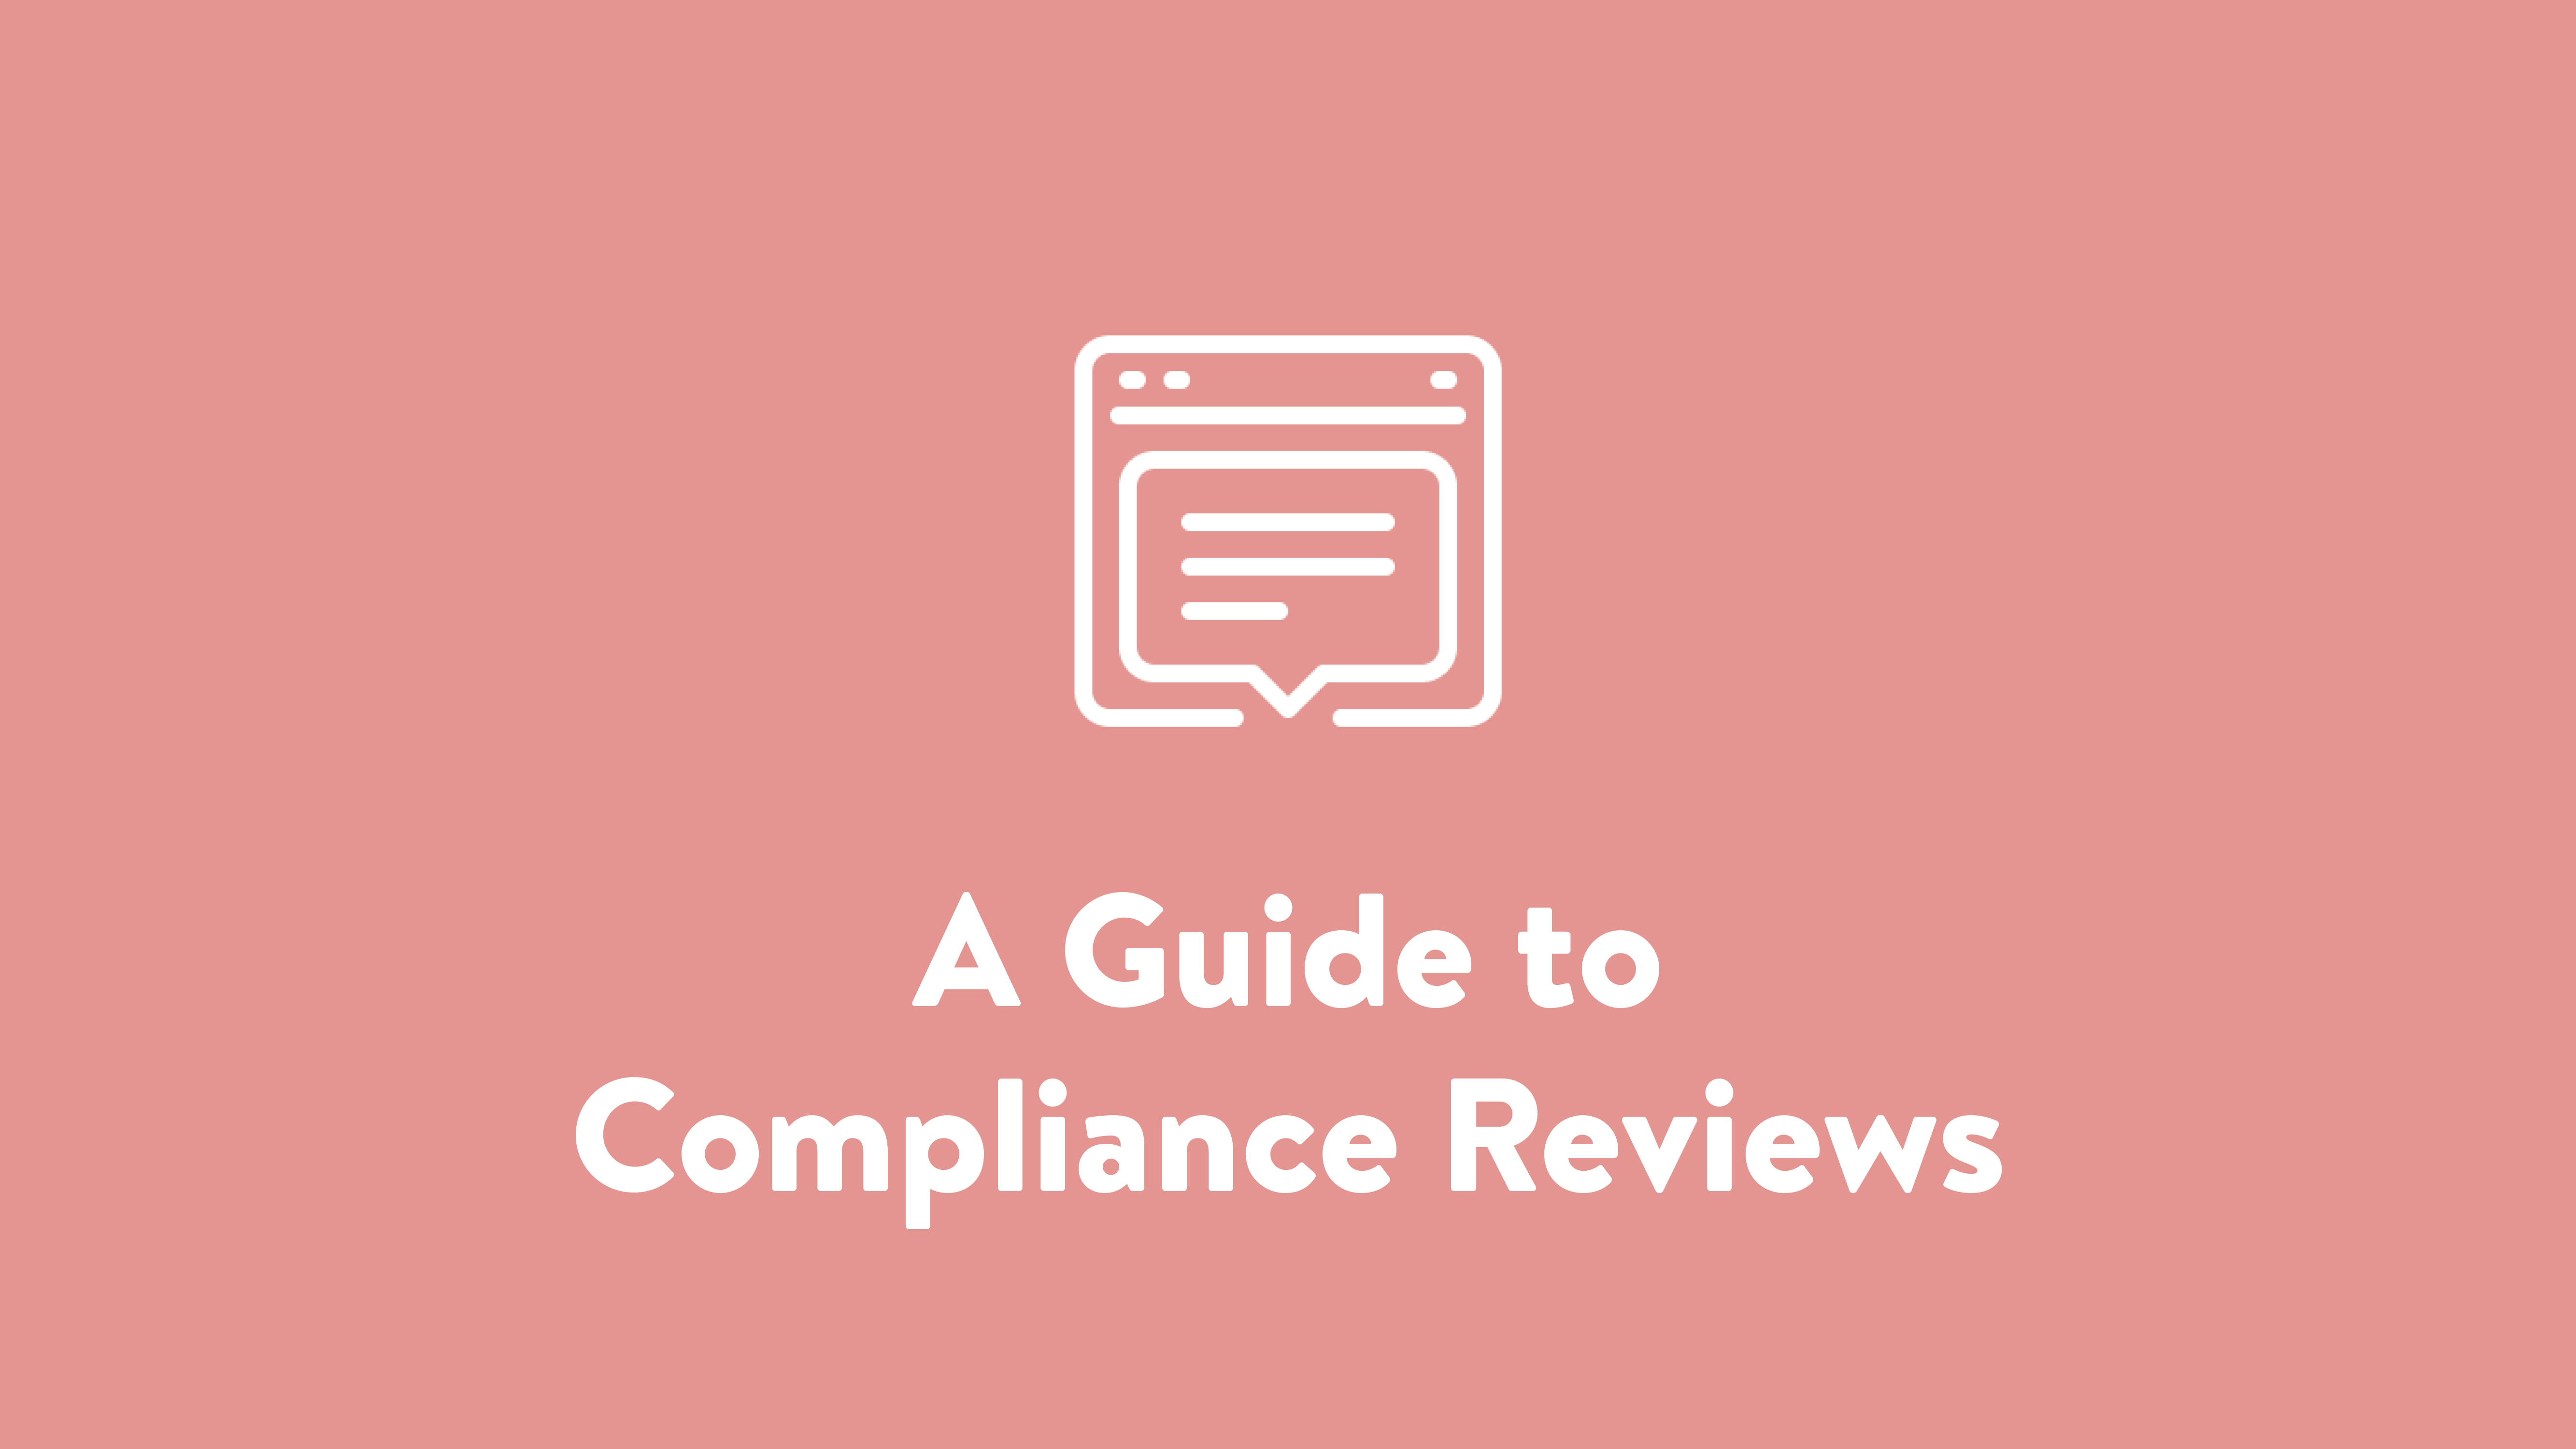 A Guide to Compliance Reviews